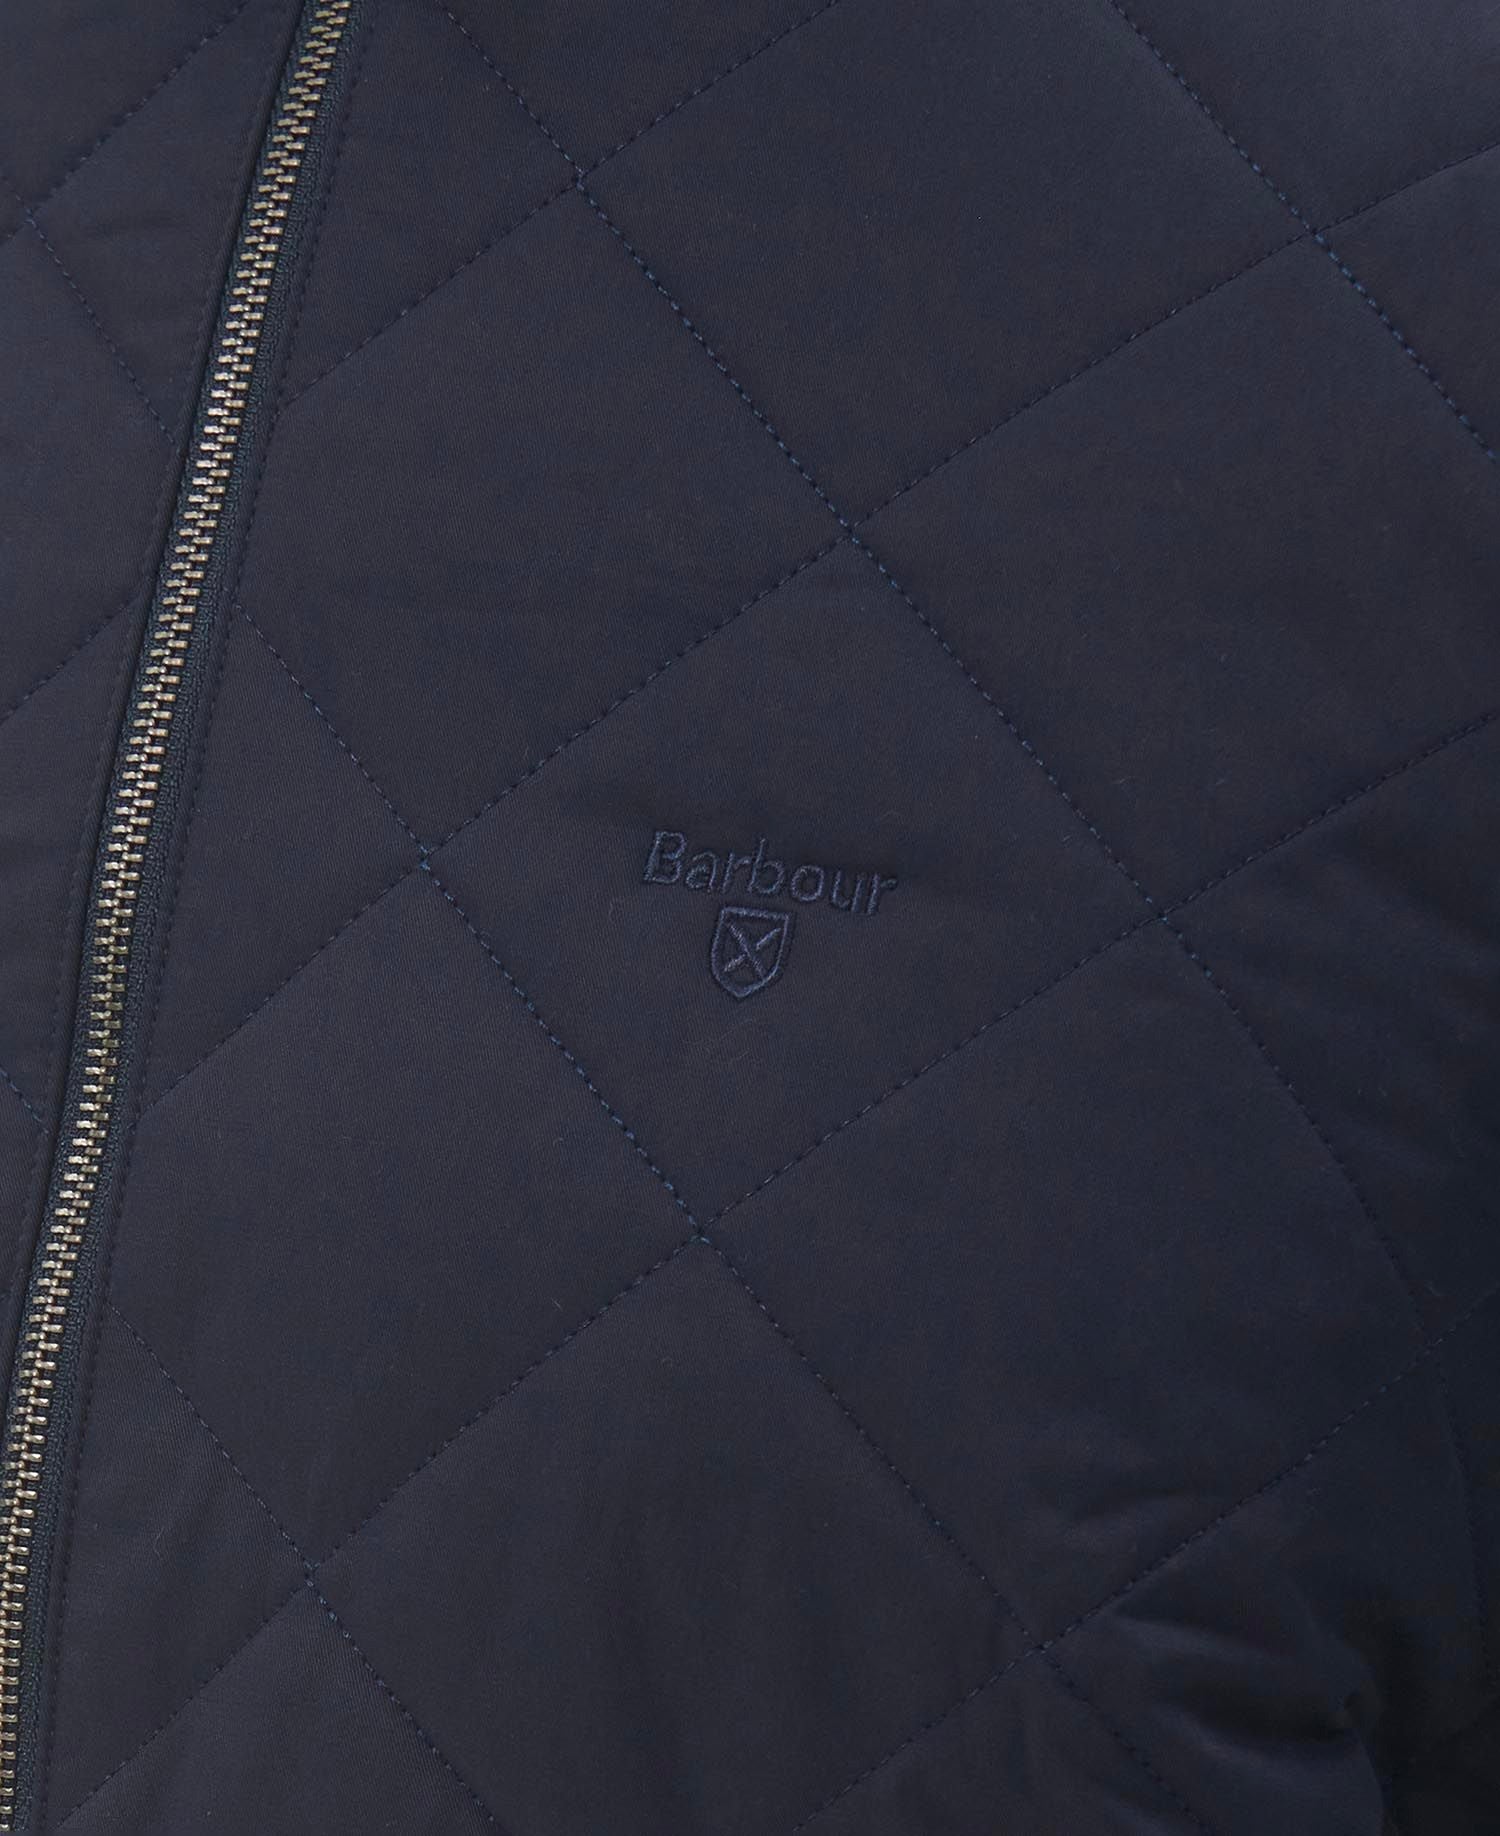 Essential Box Quilt Gilet NAVY
A must-have layering piece for outdoor enthusiasts and city dwellers alike, the Barbour Essential Box Quilt Gilet combines padded warmth to the front with a stylish wool-blend panel to the reverse. With a lightly brushed finish and logo embroidery to the chest, it delivers a premium look from the waist up. BARBOUR